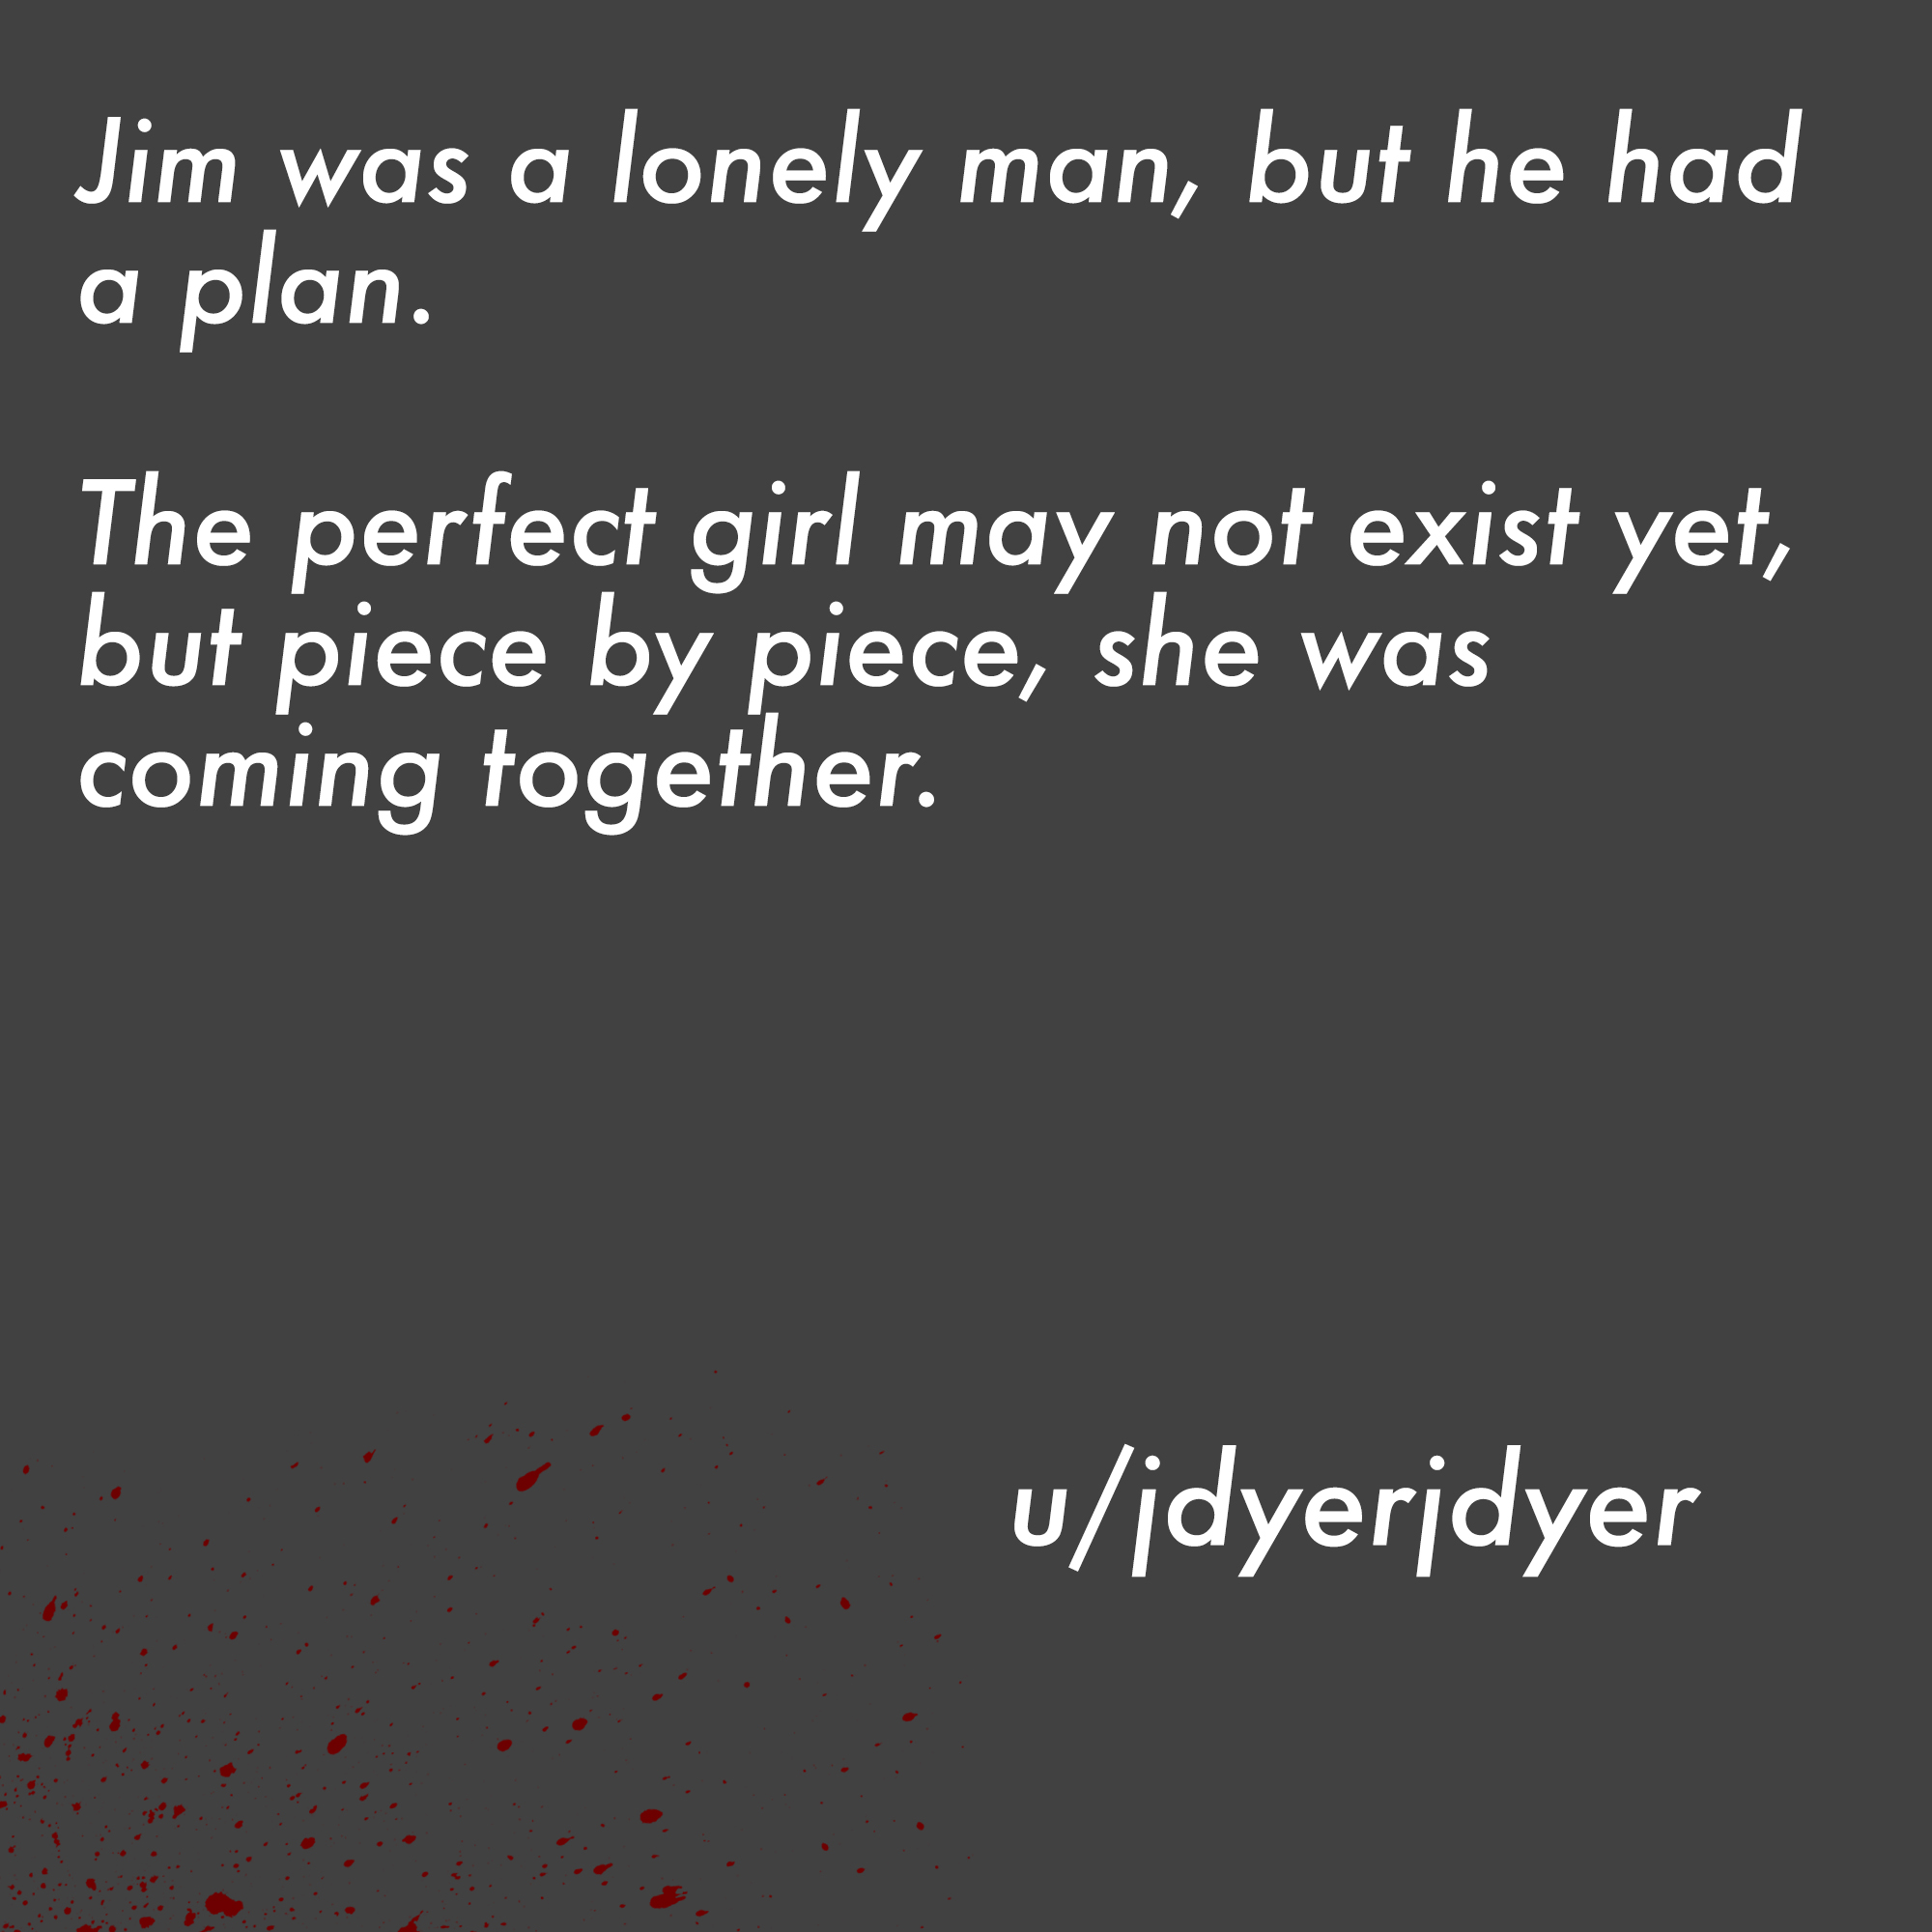 two line horror stories - angle - Jim was a lonely man, but he had a plan. The perfect girl may not exist yet, but piece by piece, she was coming together. uidyeridyer